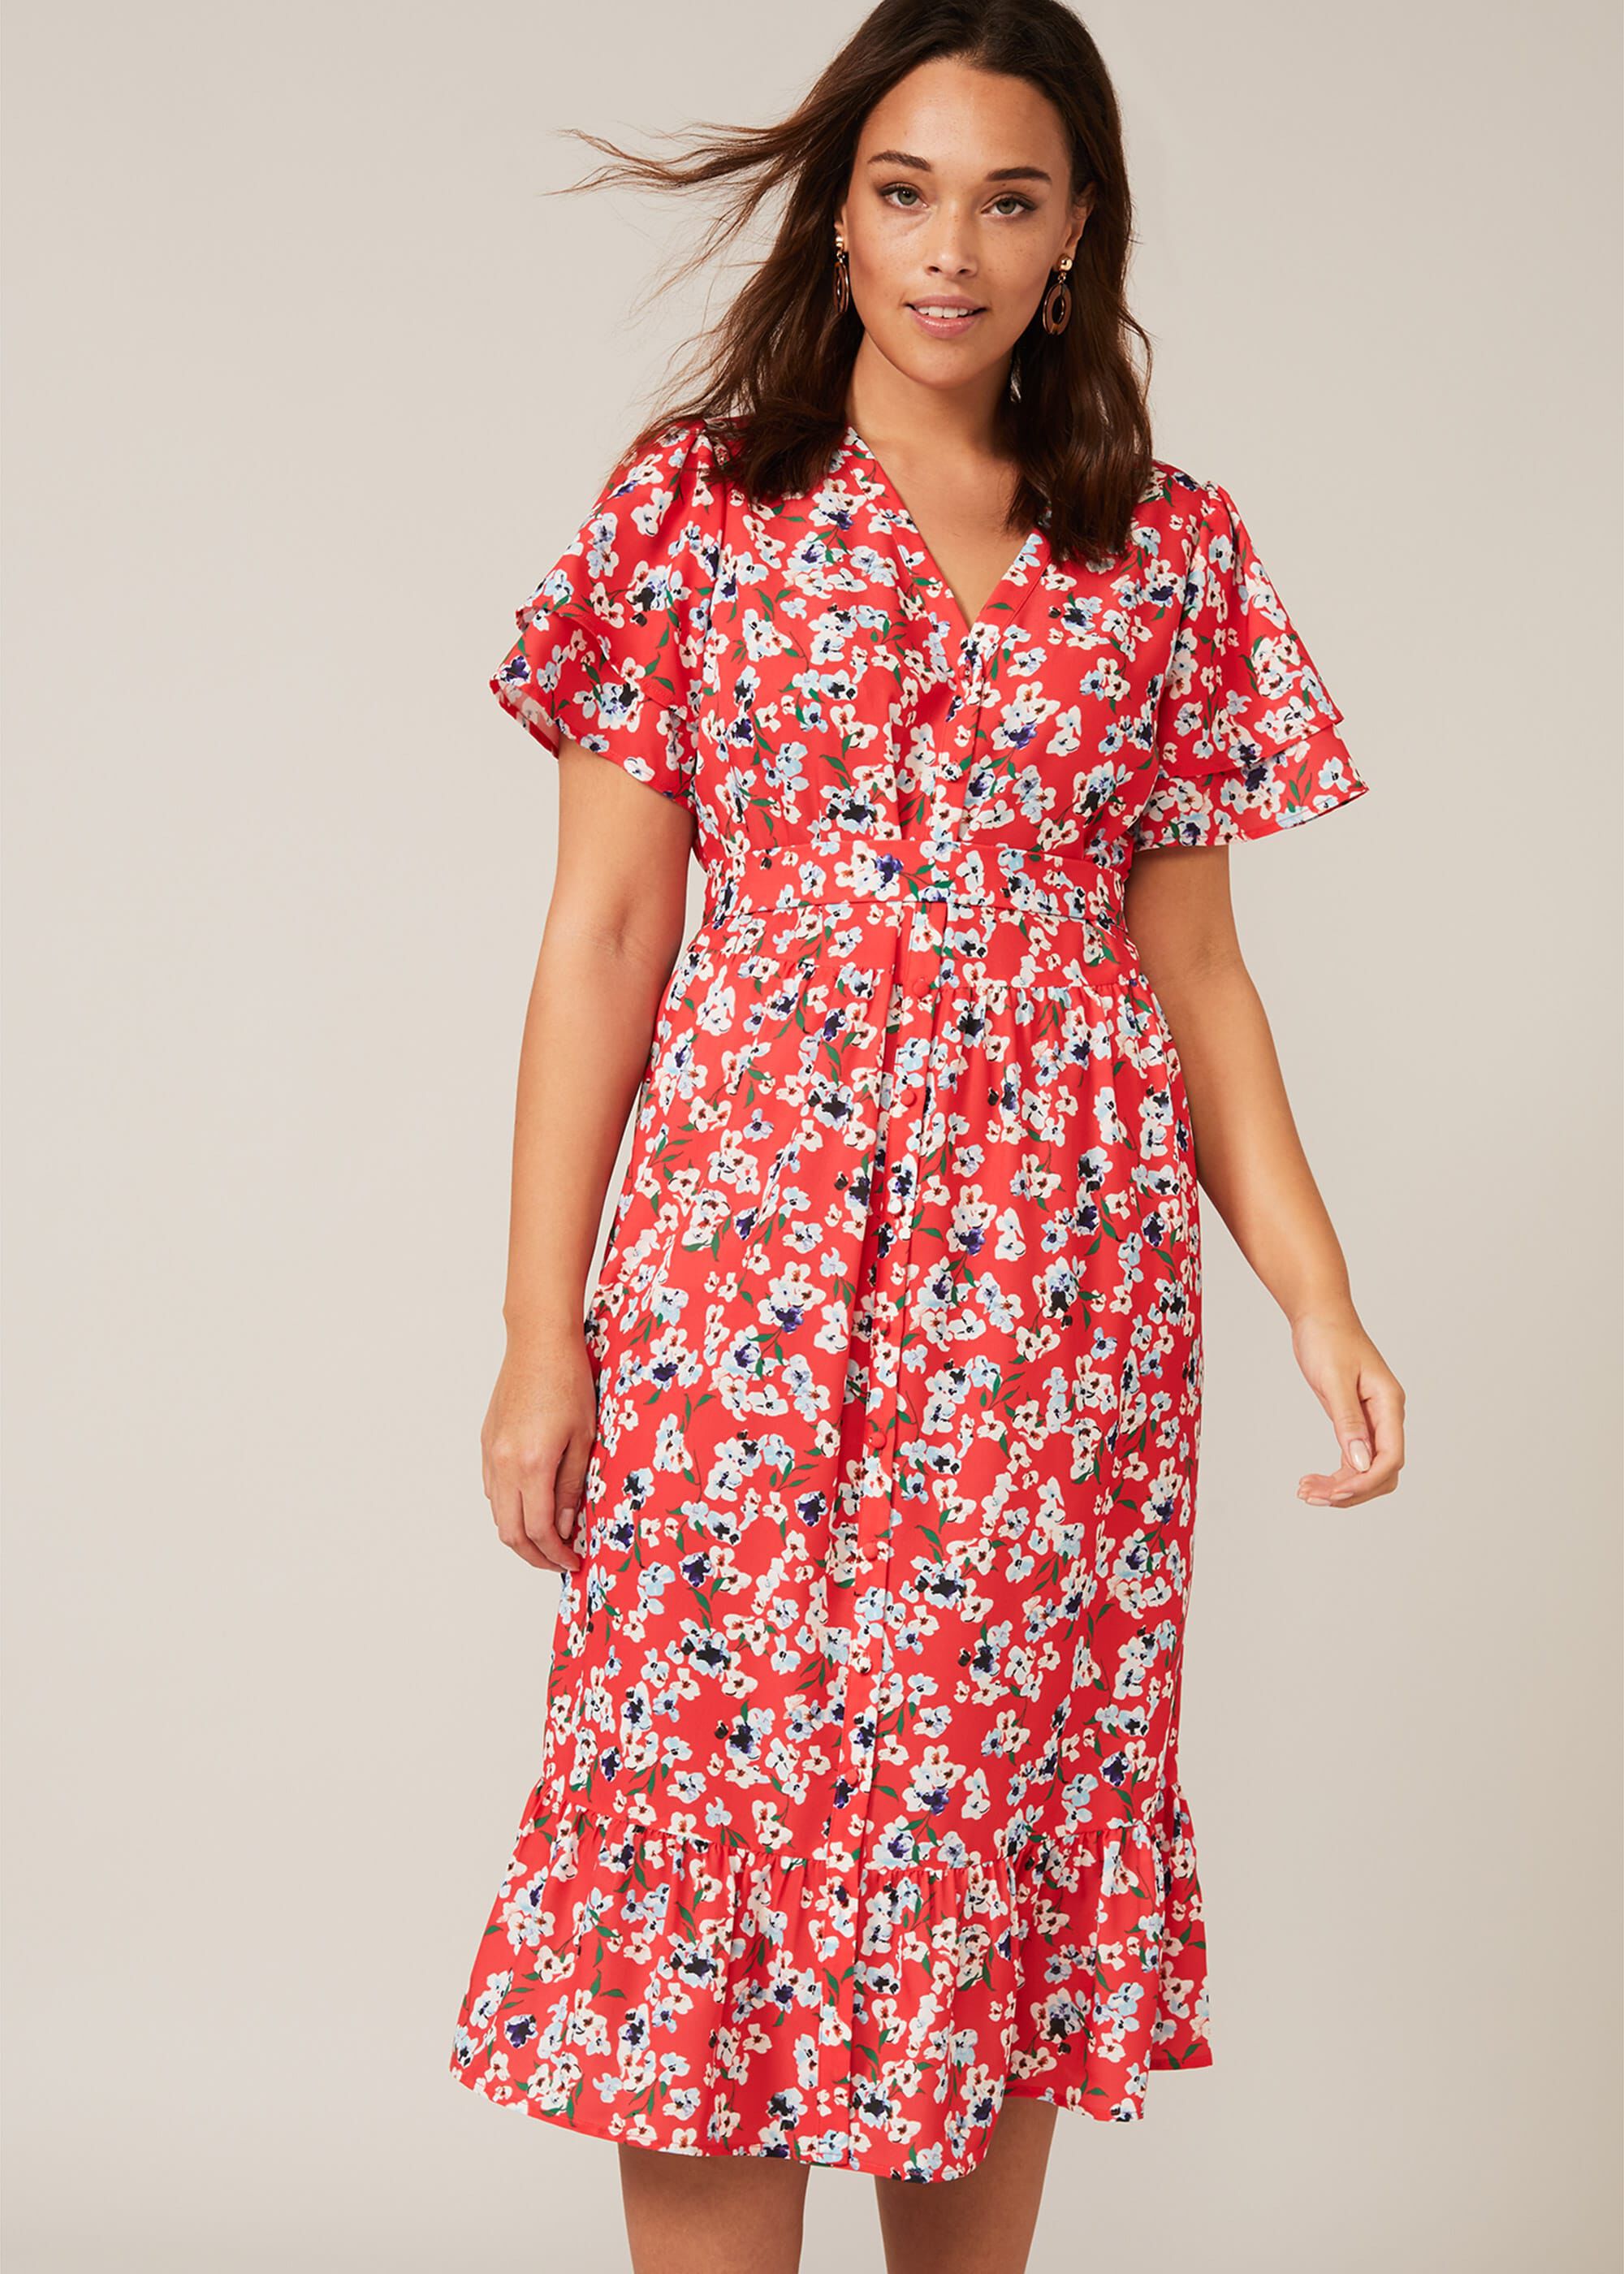 Claudette Ditsy Floral Dress | Phase Eight